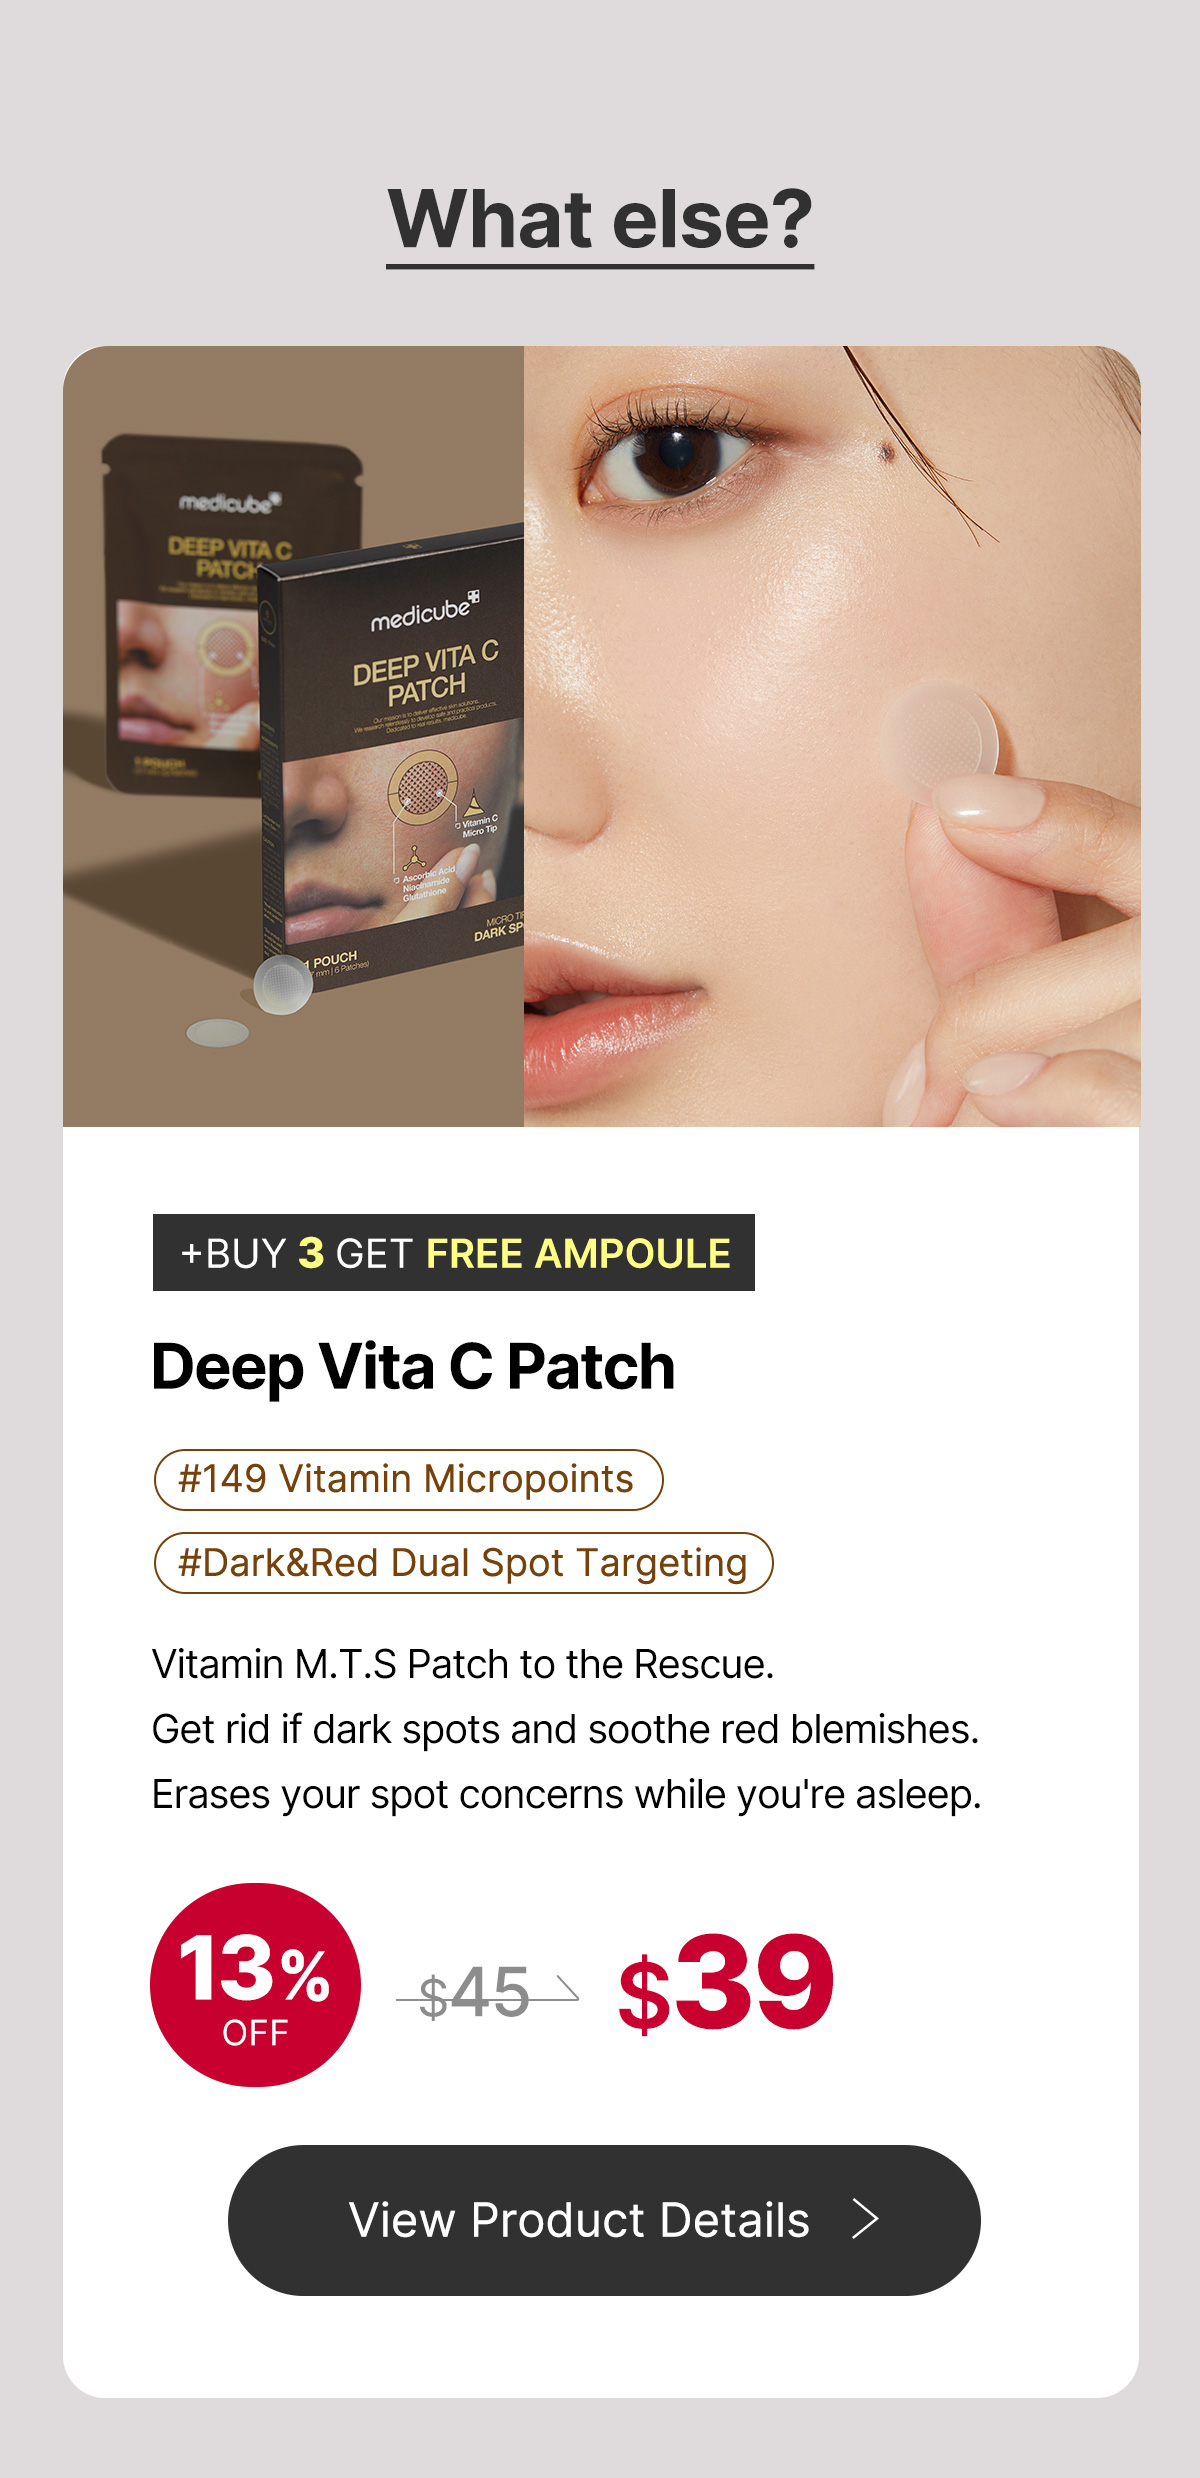 What else? e e Cc EP A Ny DE! BUY 3 GET FREE AMPOULE Deep Vita C Patch #DarkRed Dual Spot Targeting Vitamin M.T.S Patch to the Rescue. Get rid if dark spots and soothe red blemishes. Erases your spot concerns while you're asleep. @%4?9 View Product Details 